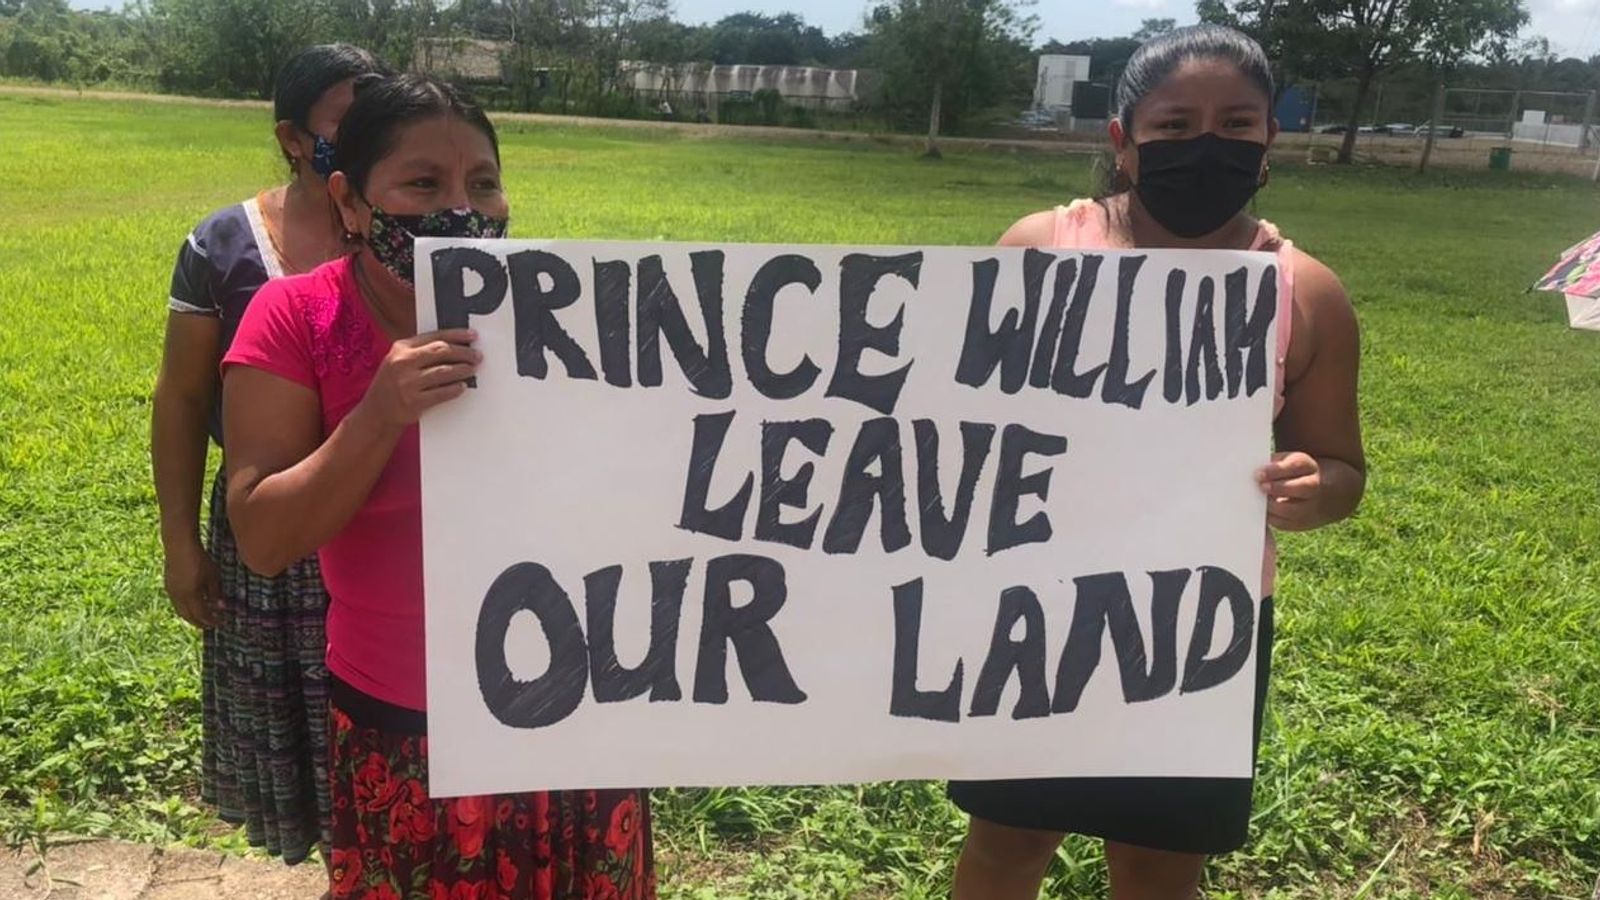 PRINCE WILLIAM LEAVE OUR LAND